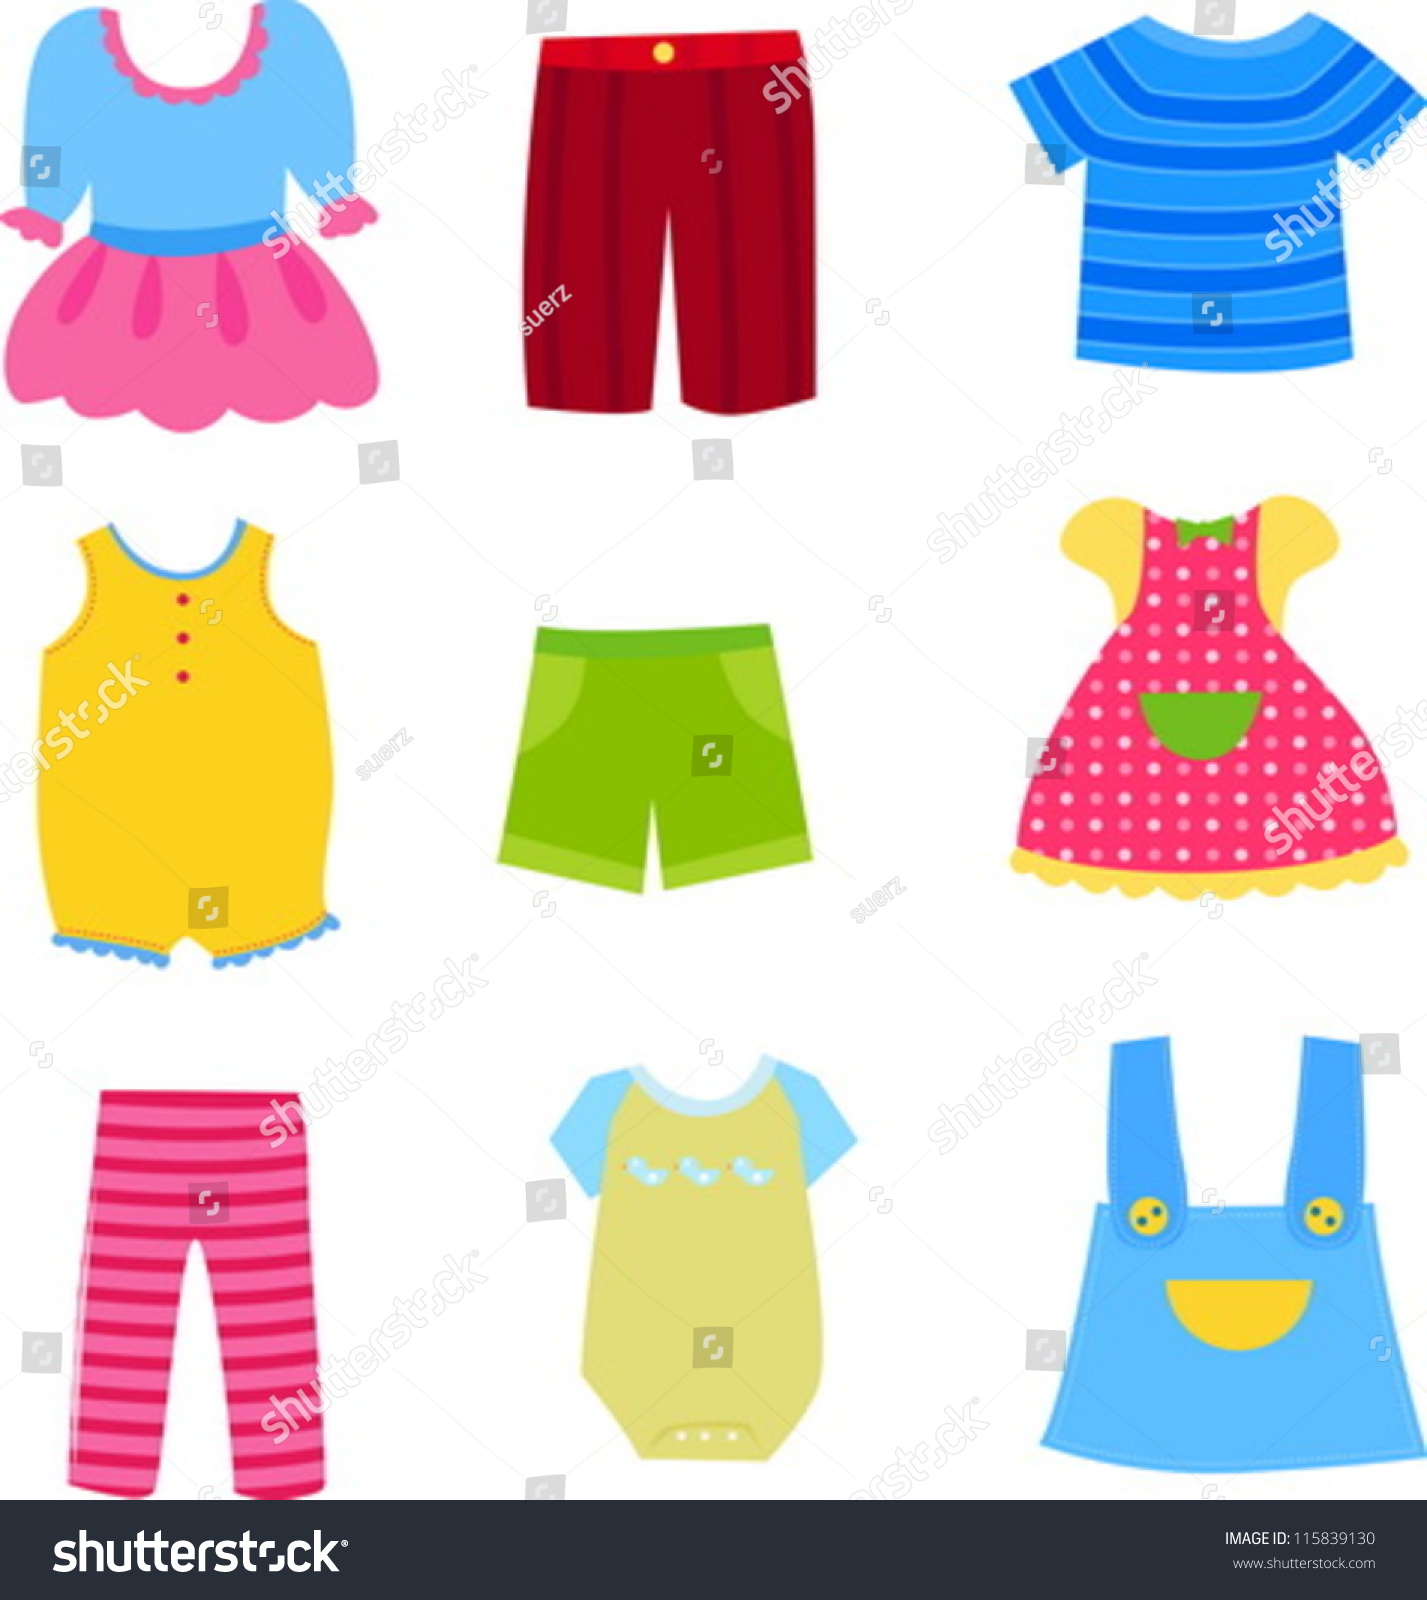 Baby Children Clothes Collection Stock Vector 115839130 - Shutterstock